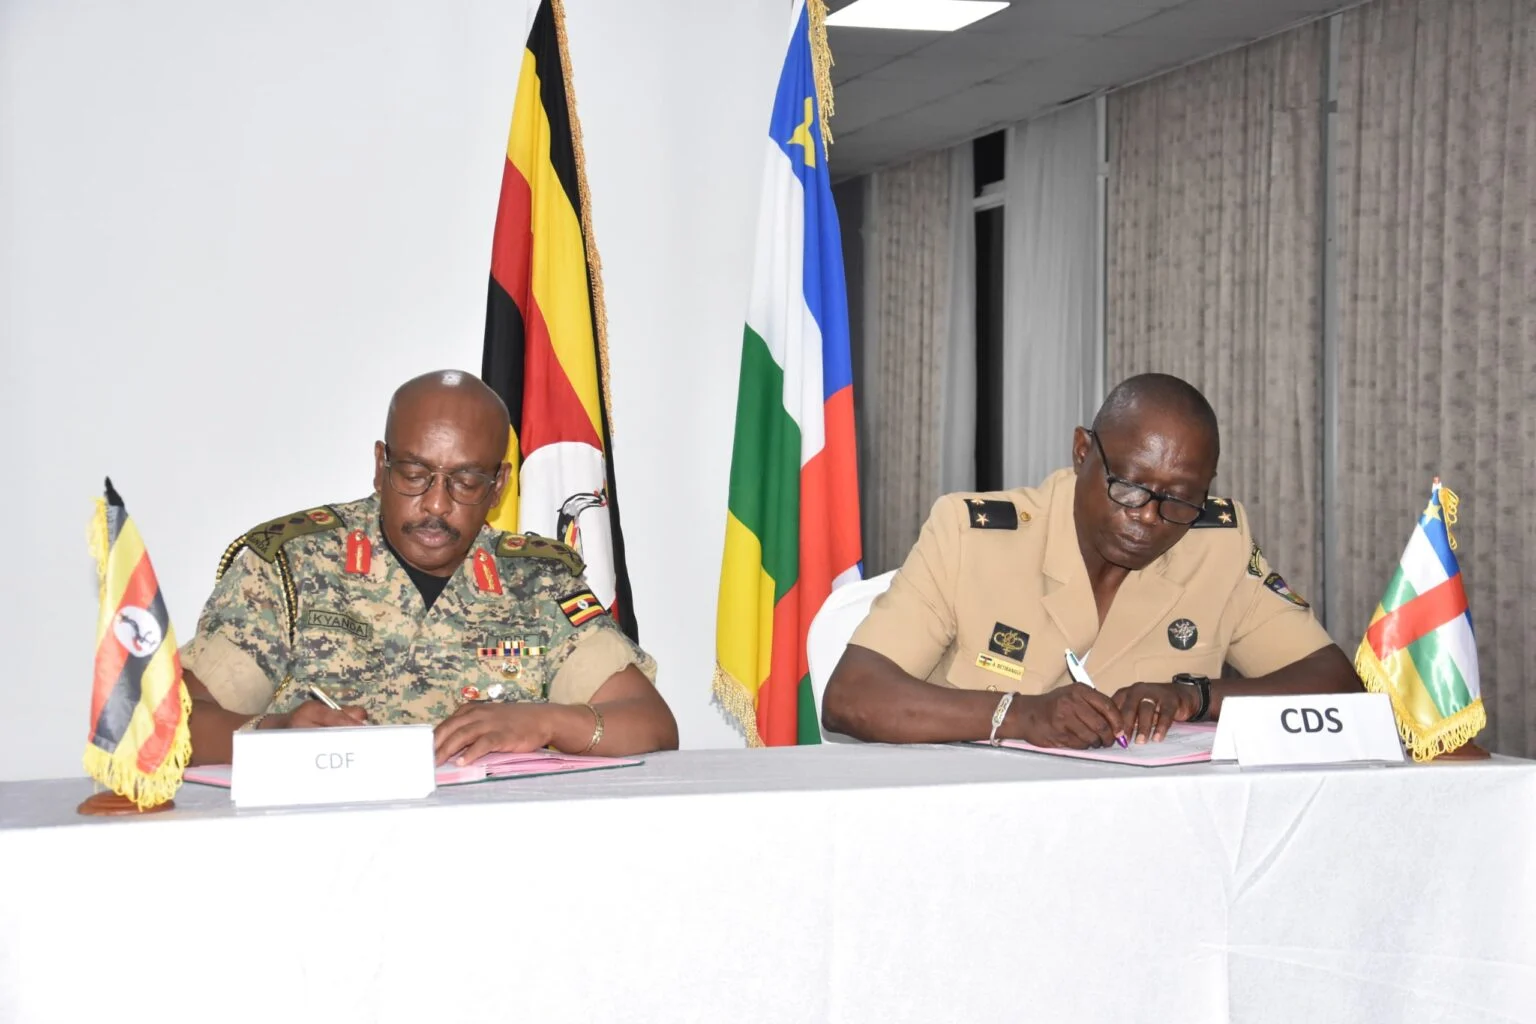 Uganda enters bizarre military deal with Central African Republic to promote ‘peace and stability’